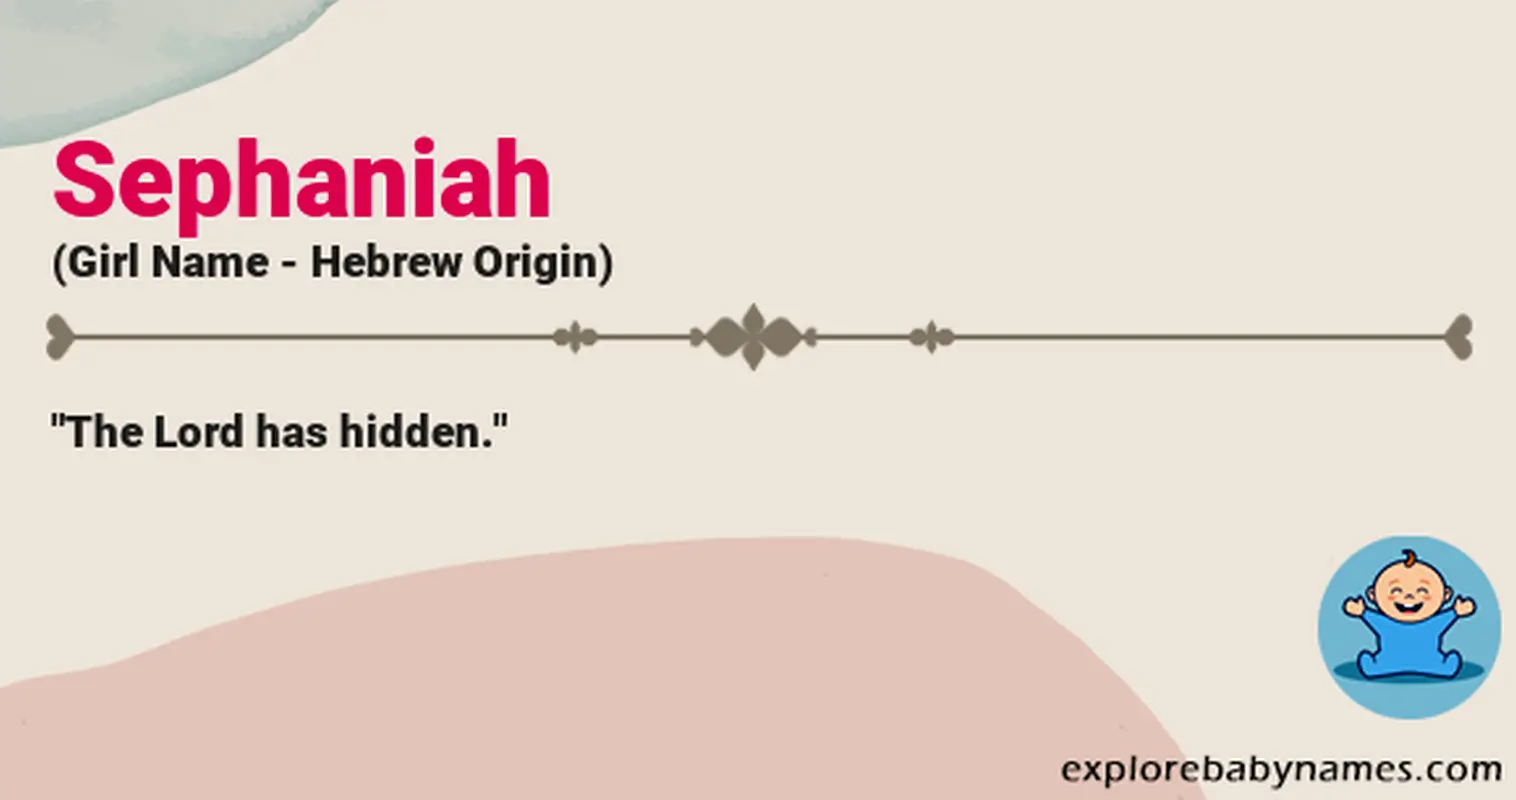 Meaning of Sephaniah